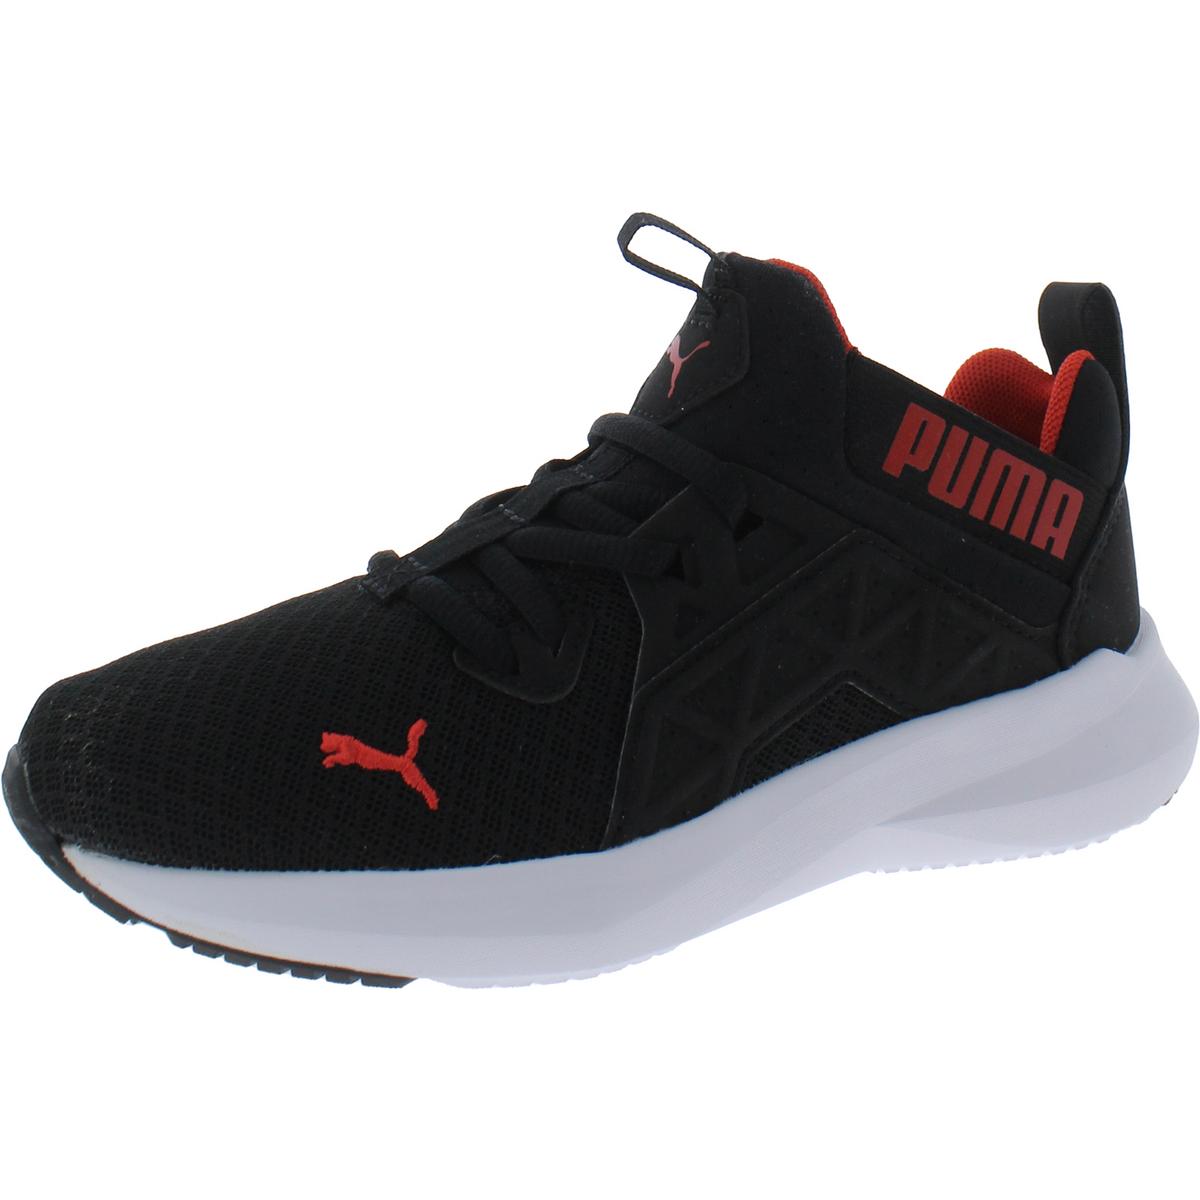 Puma Soft Enzo NXT PS Boys Little Kid Lifestyle Athletic and Training Shoes